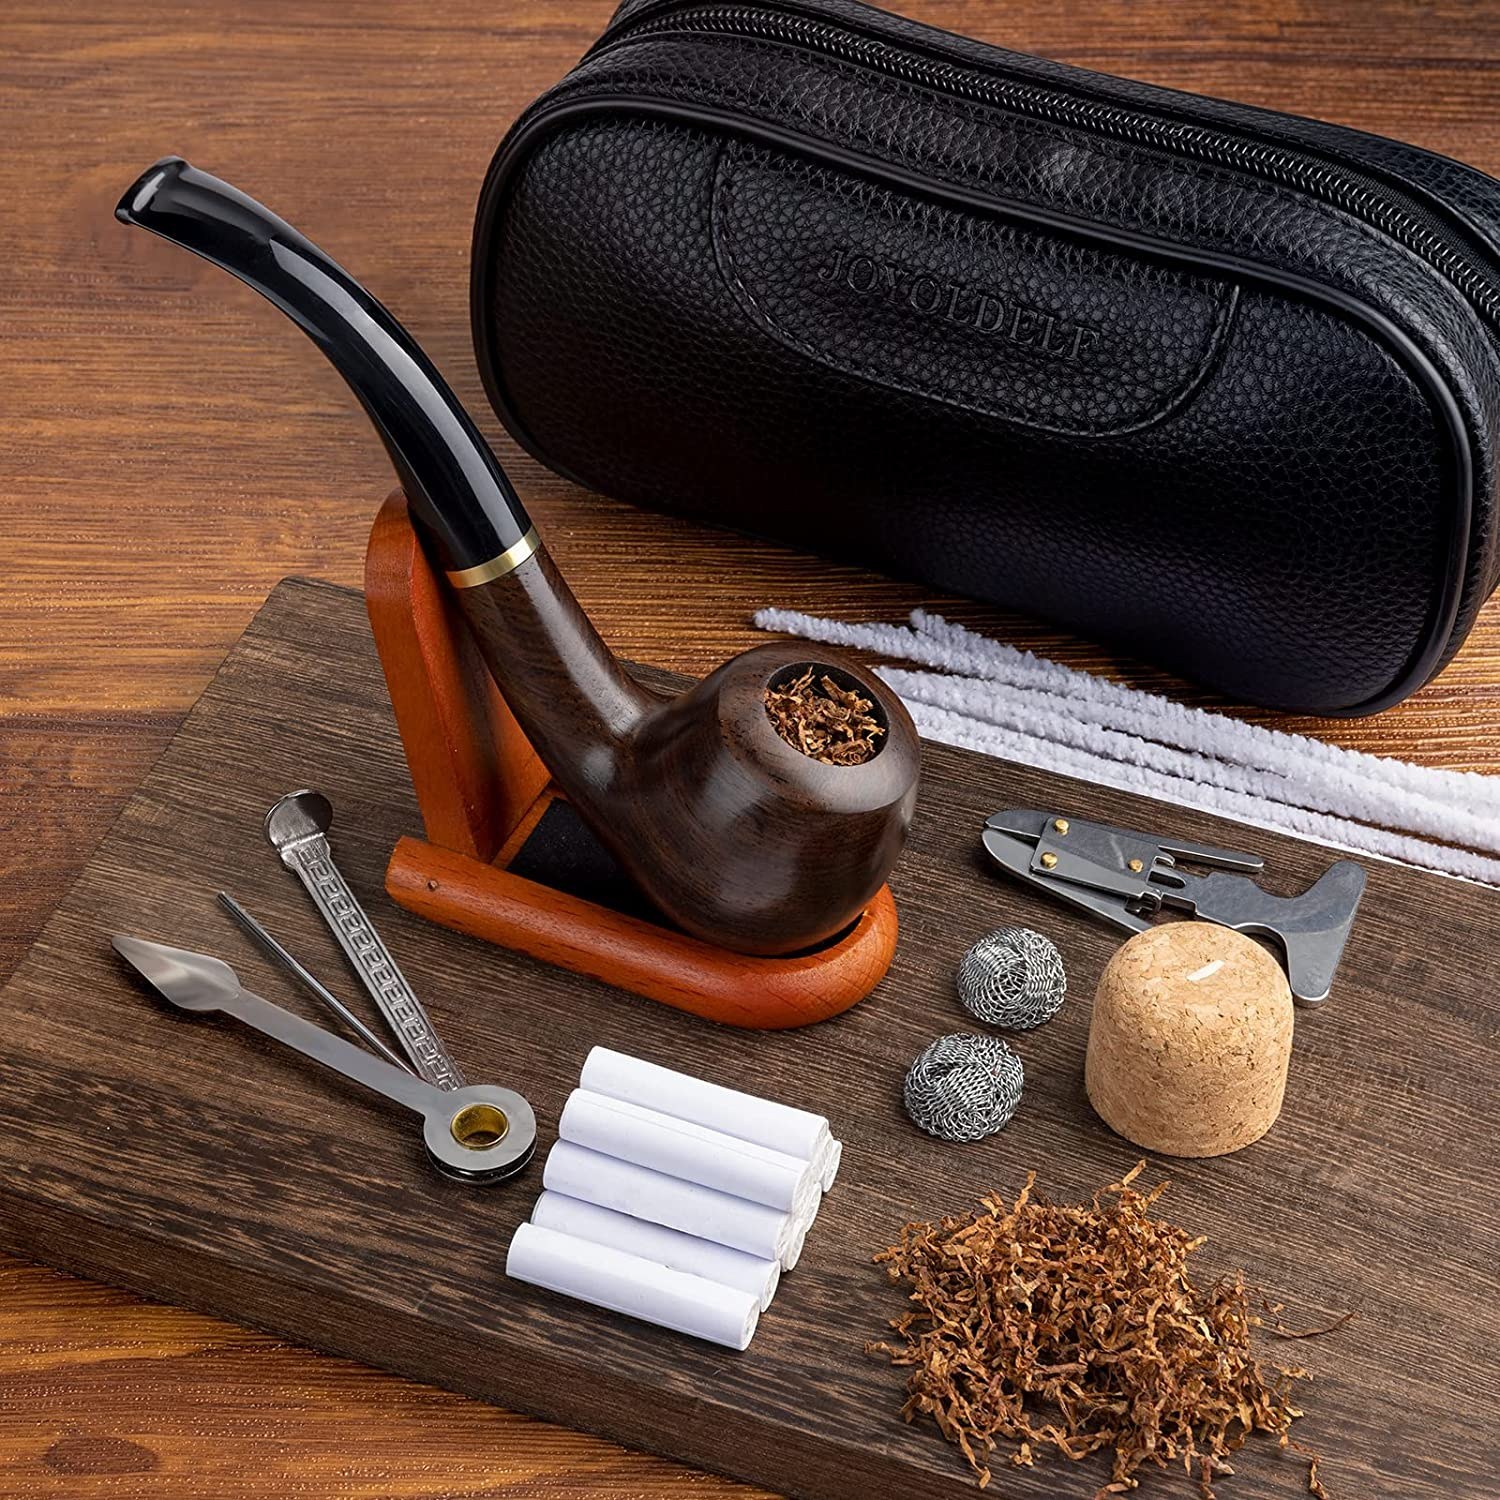  Joyoldelf Smoking Pipe, Luxury Tobacco Pipe with Leather Tobacco  Pipe Pouch, Deepened & Windproof Tobacco Pipes for Smoking with 9mm Pipe  Filter, Tobacco Pipe Stand and Smoking Accessories : Health 